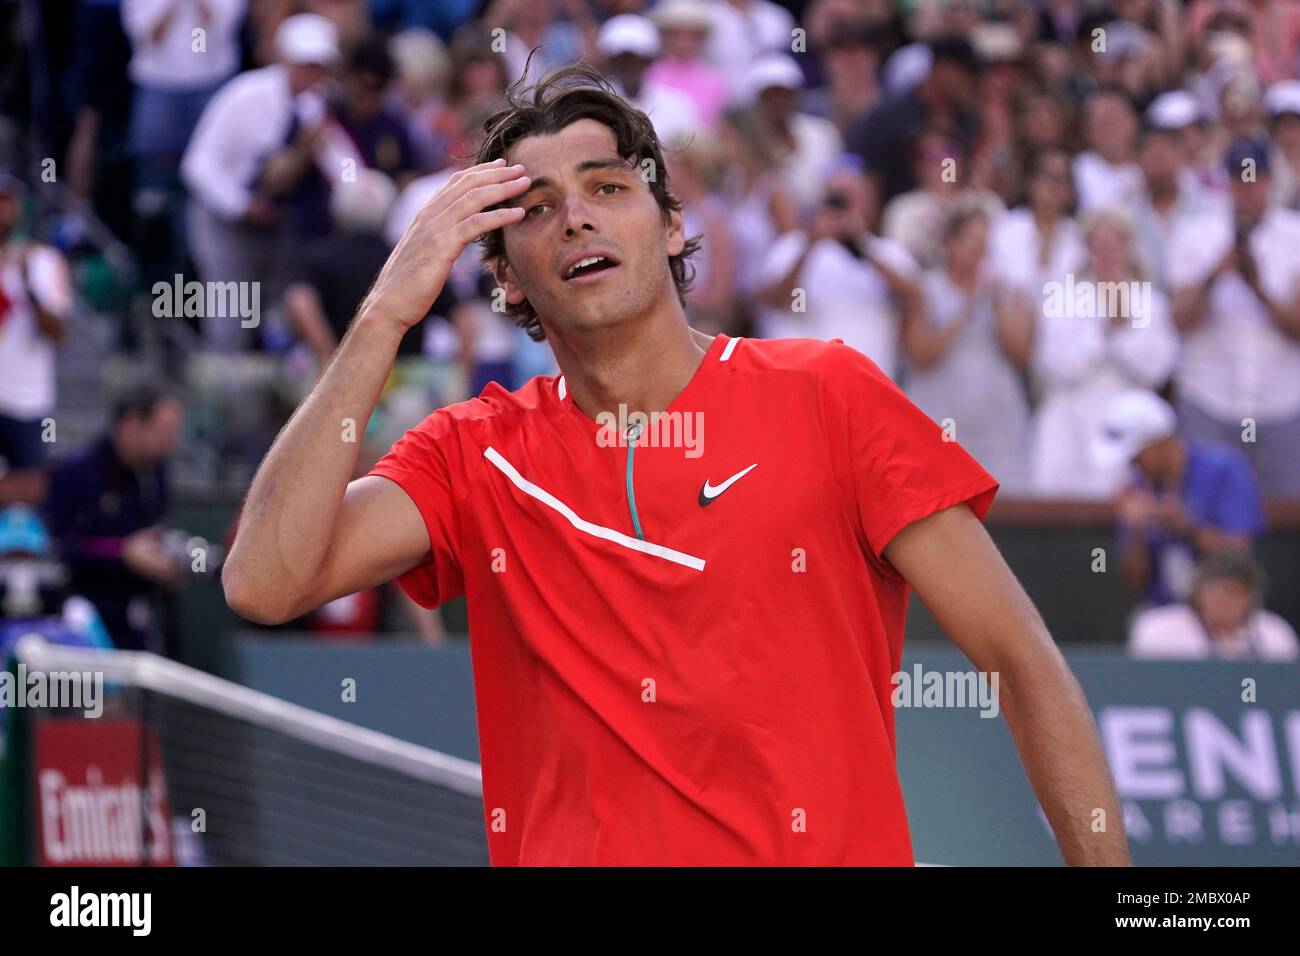 Taylor Fritz reacts after defeating Rafael Nadal, of Spain, in the mens singles finals at the BNP Paribas Open tennis tournament Sunday, March 20, 2022, in Indian Wells, Calif